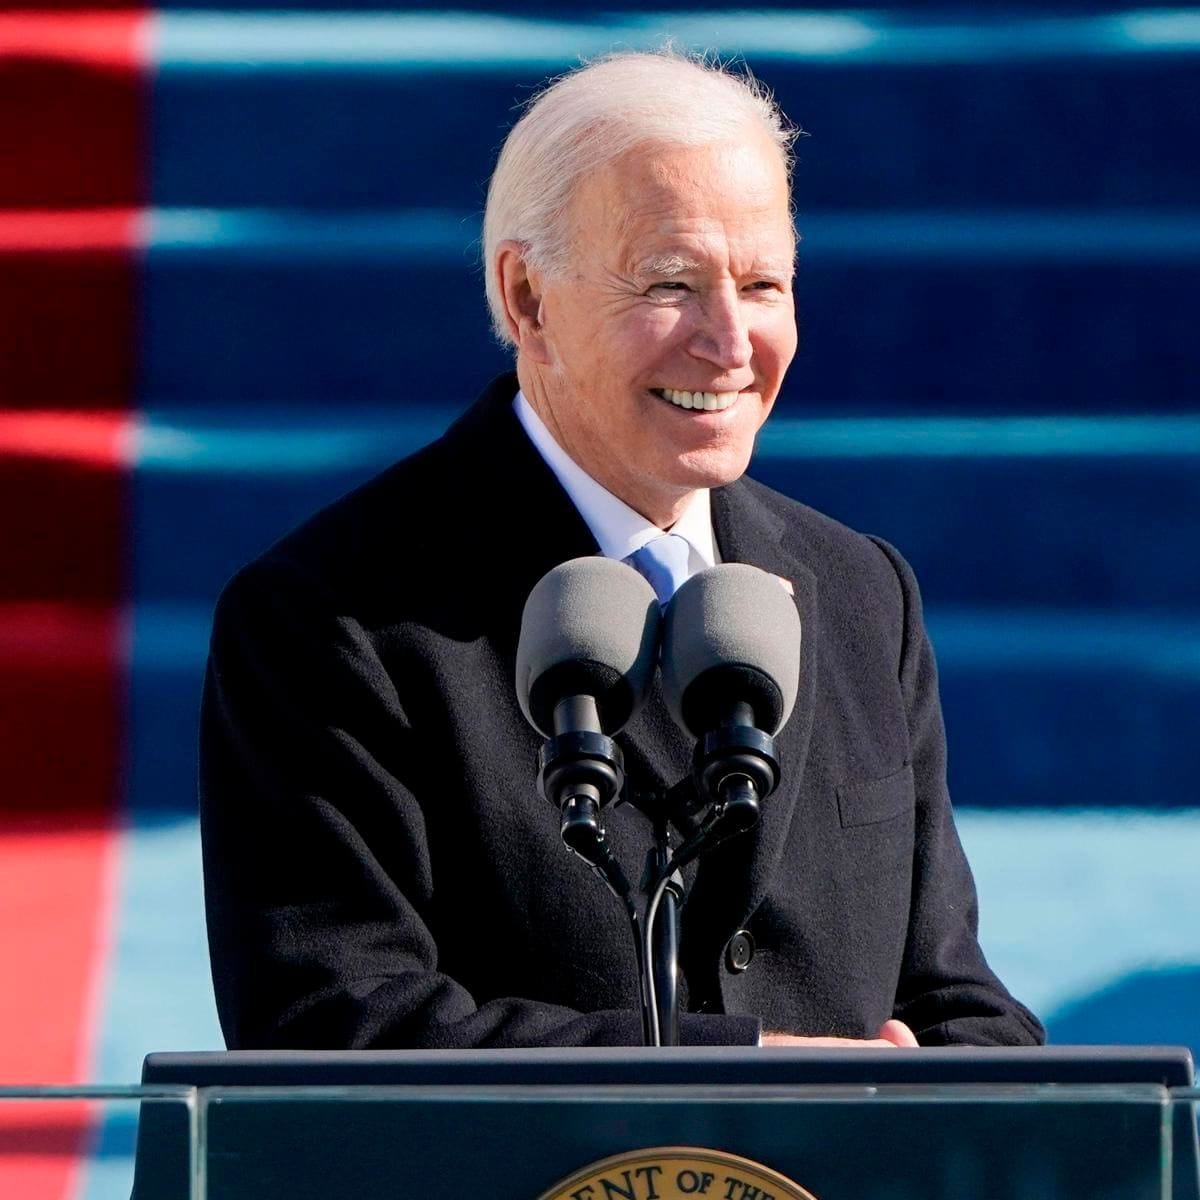 President Joe Biden has accepted an invitation to be Honorary Chairman of the 2022 Presidents Cup